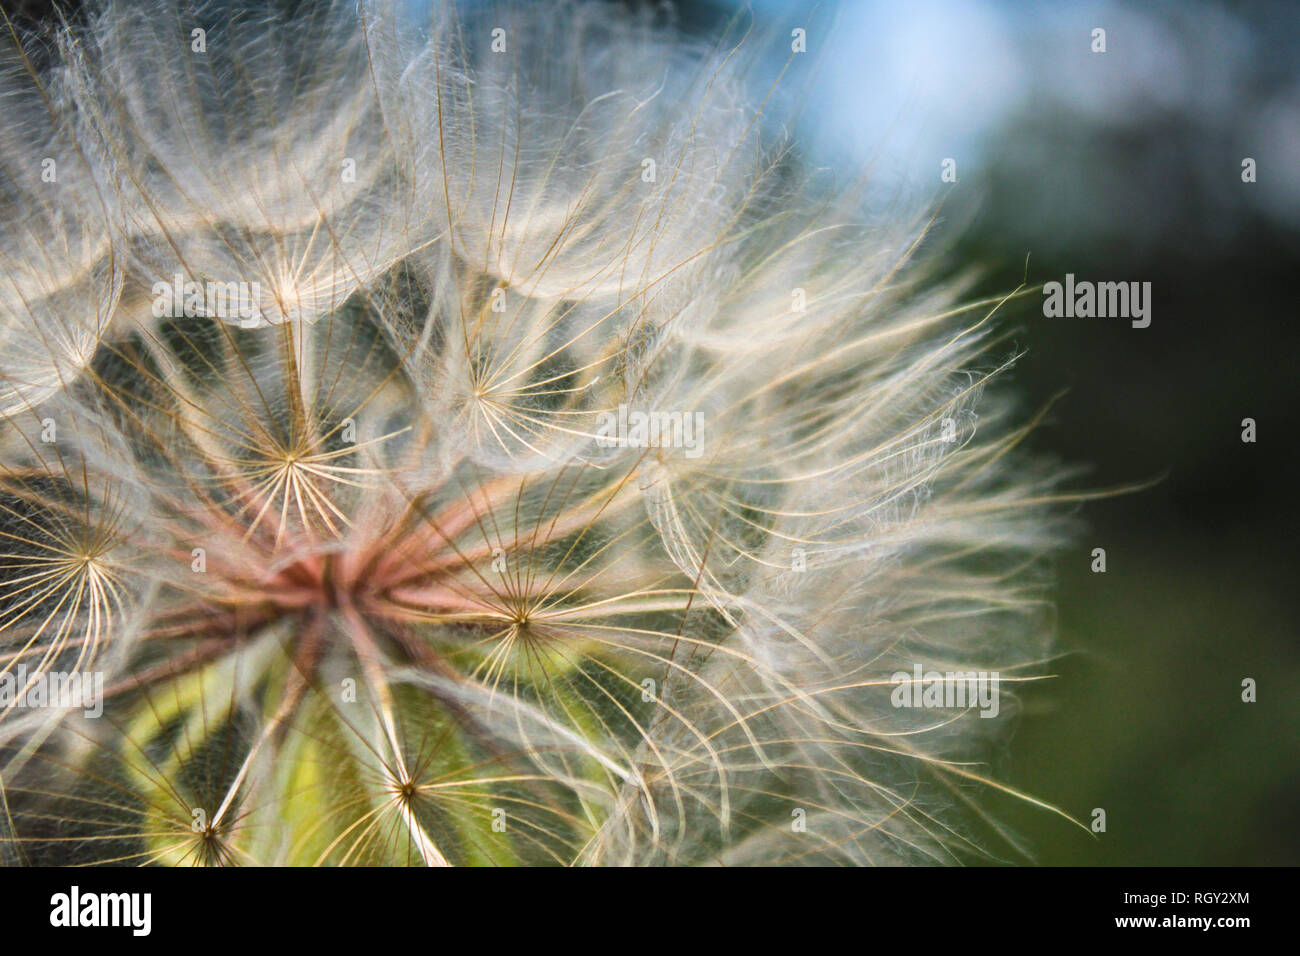 Western Goat's Beard plant gone to seed Stock Photo